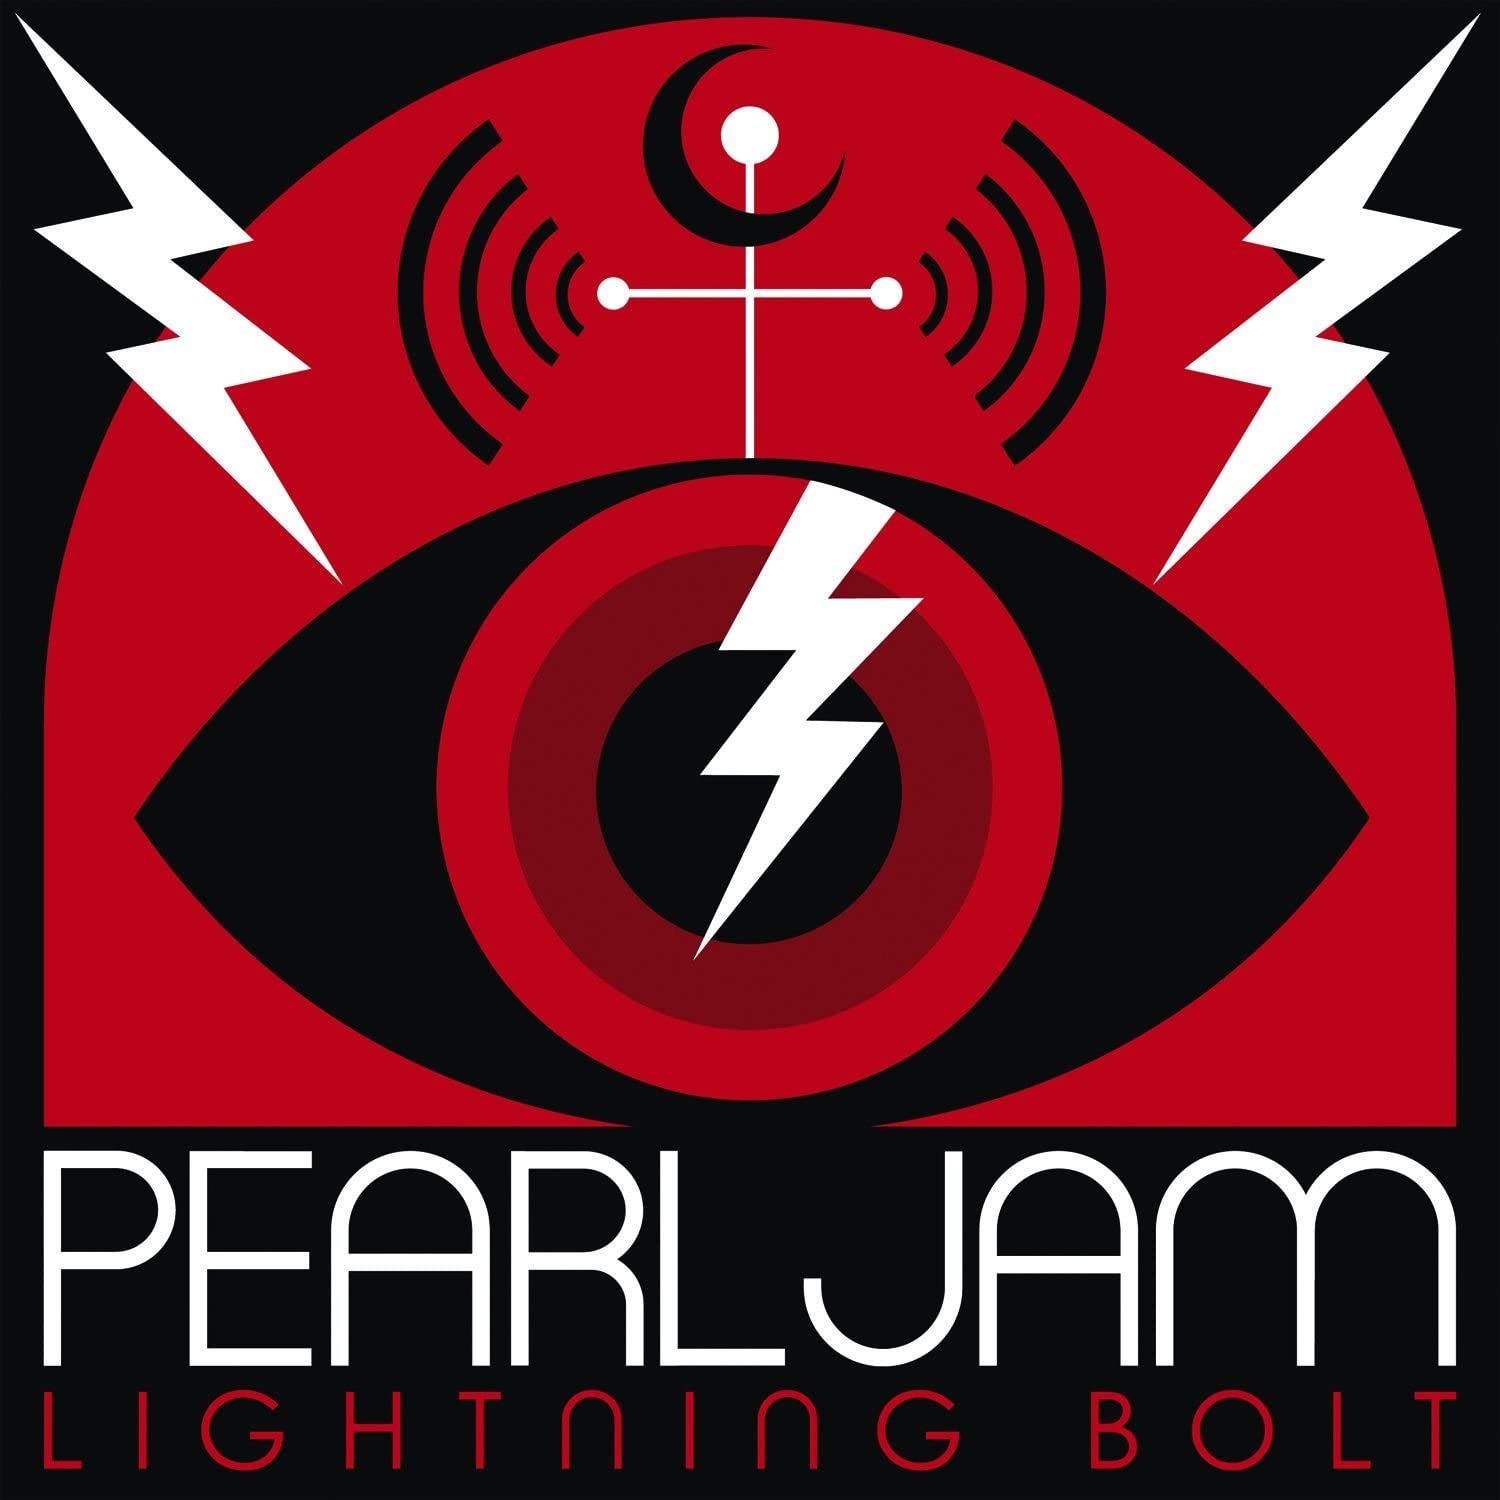 Tenth studio album on Vinyl by Pearl Jam. Featuring the singles 'Mind Your Manners' and 'Sirens', the album debuted in the UK Albums Chart at #2. The album also includes the tracks 'Pendulum', 'Getaway' and the title track 'Lightning Bolt'.